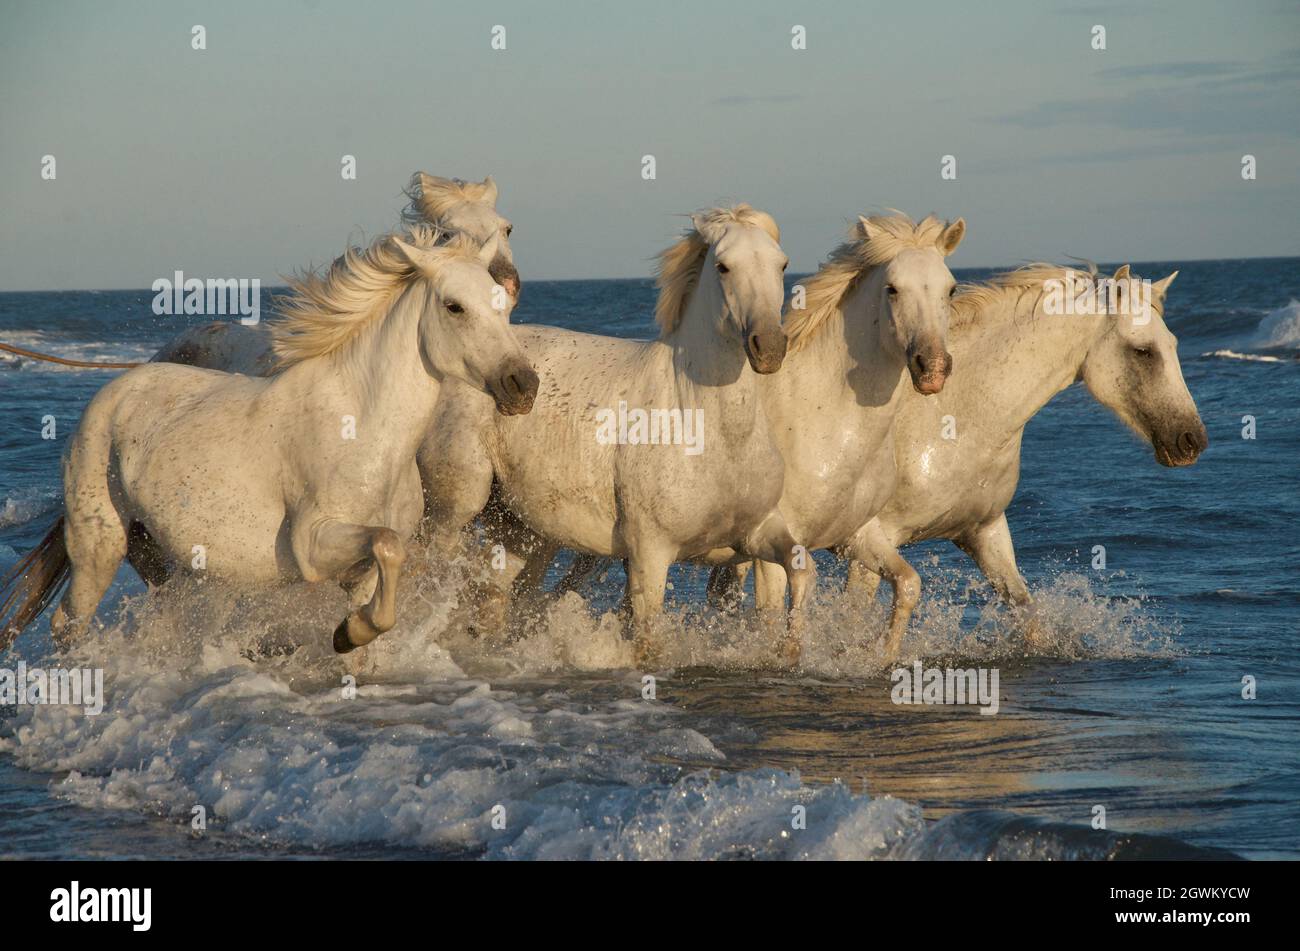 Horses In Water Stock Photo - Alamy